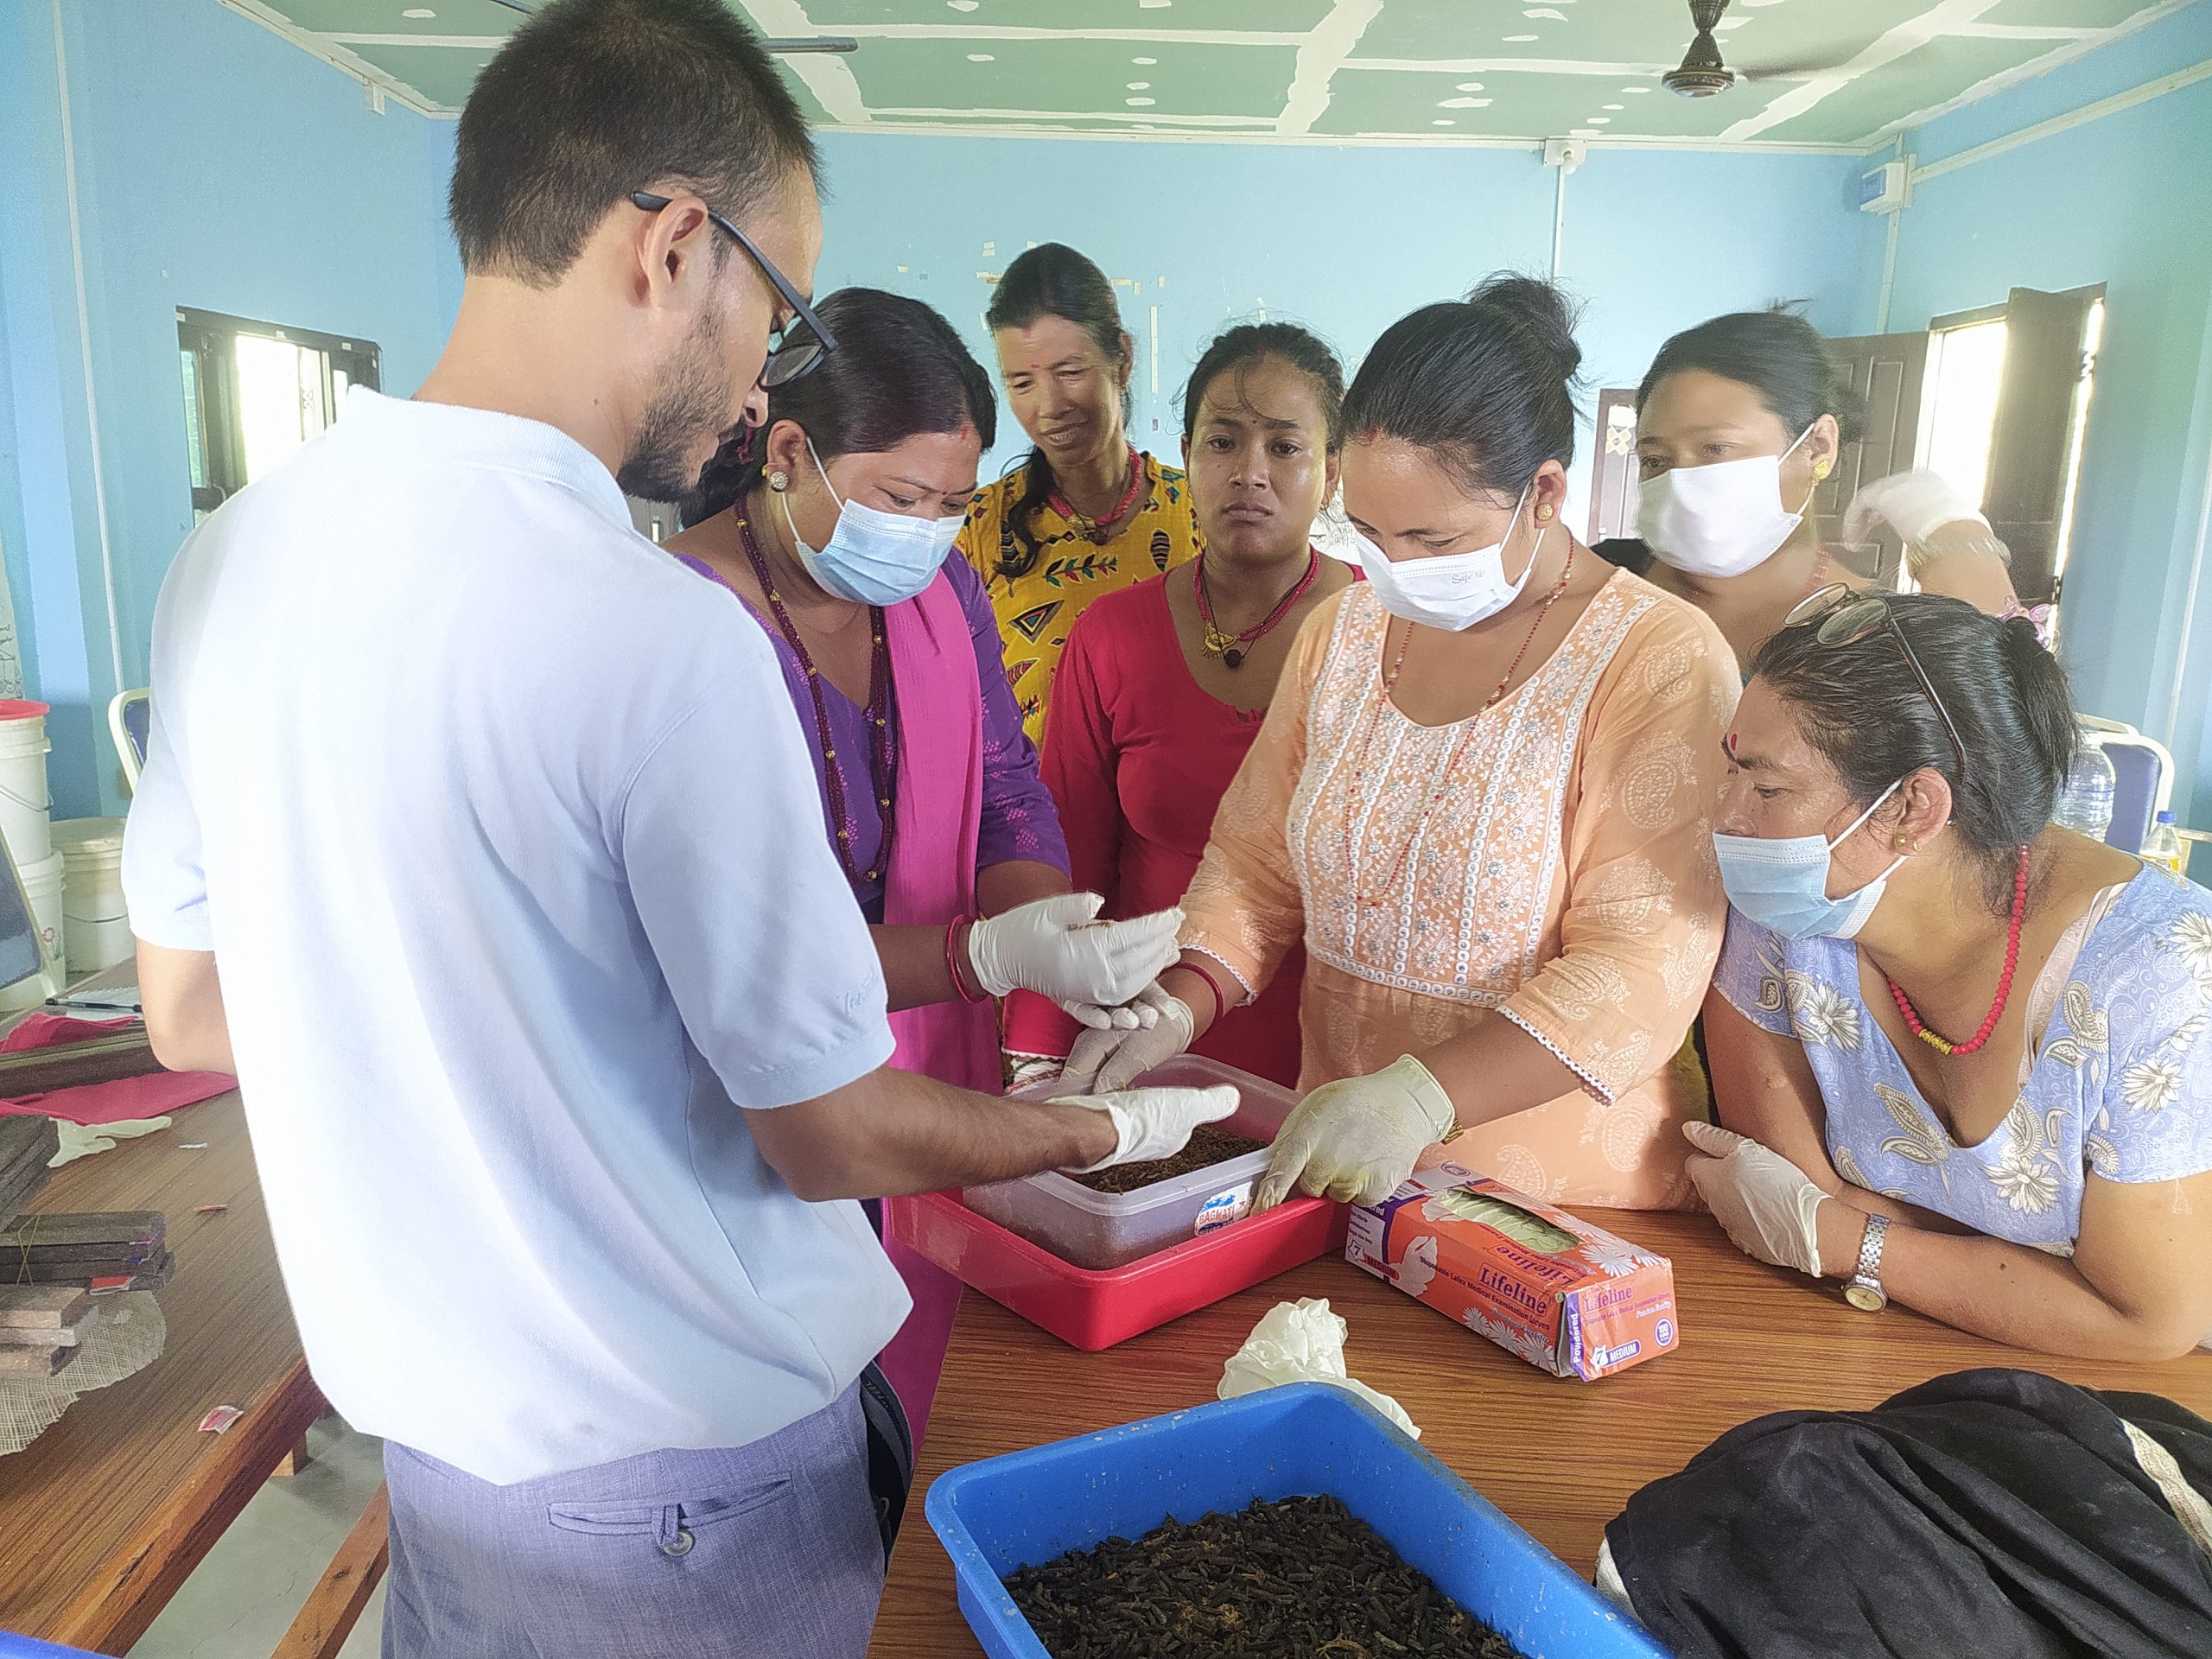 Women gather round a man holding larvae at a demonstration of how black soldier fly larvae can be bred for animal feed in Nepal